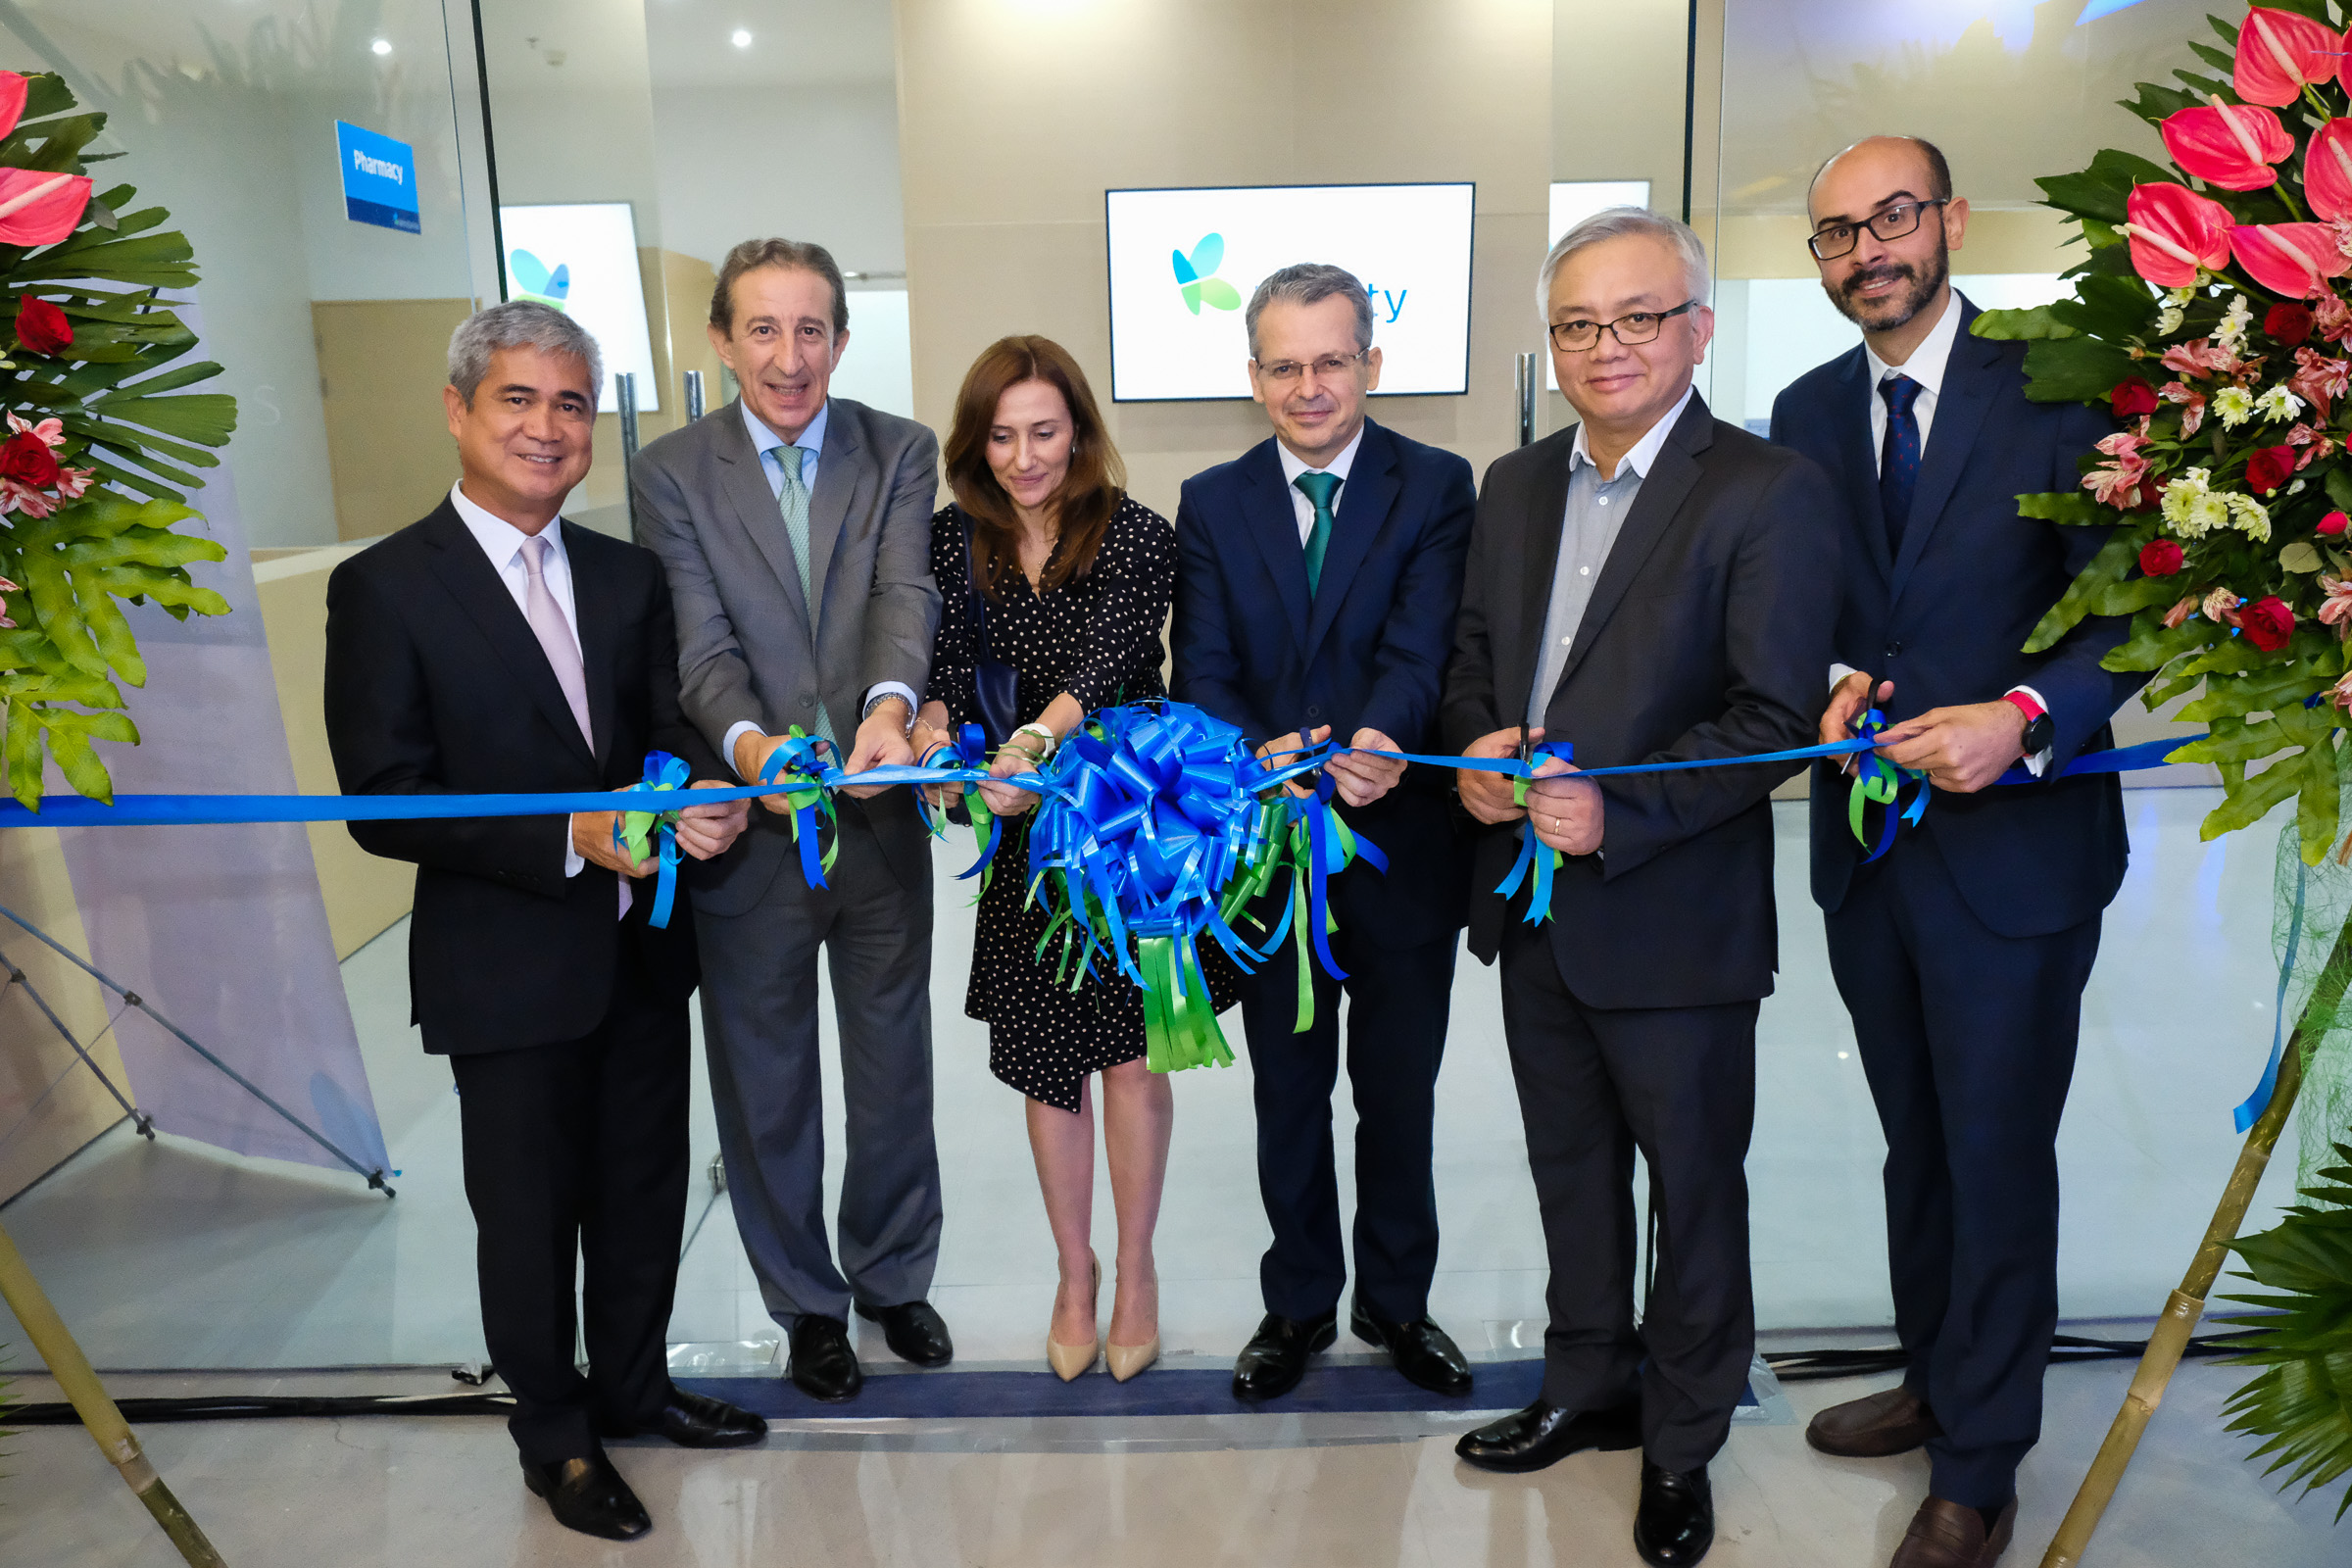 MetroSanitas Met Live clinic, the first outpatient-surgery-clinic built together by Metro Pacific and Keralty in the Philippines